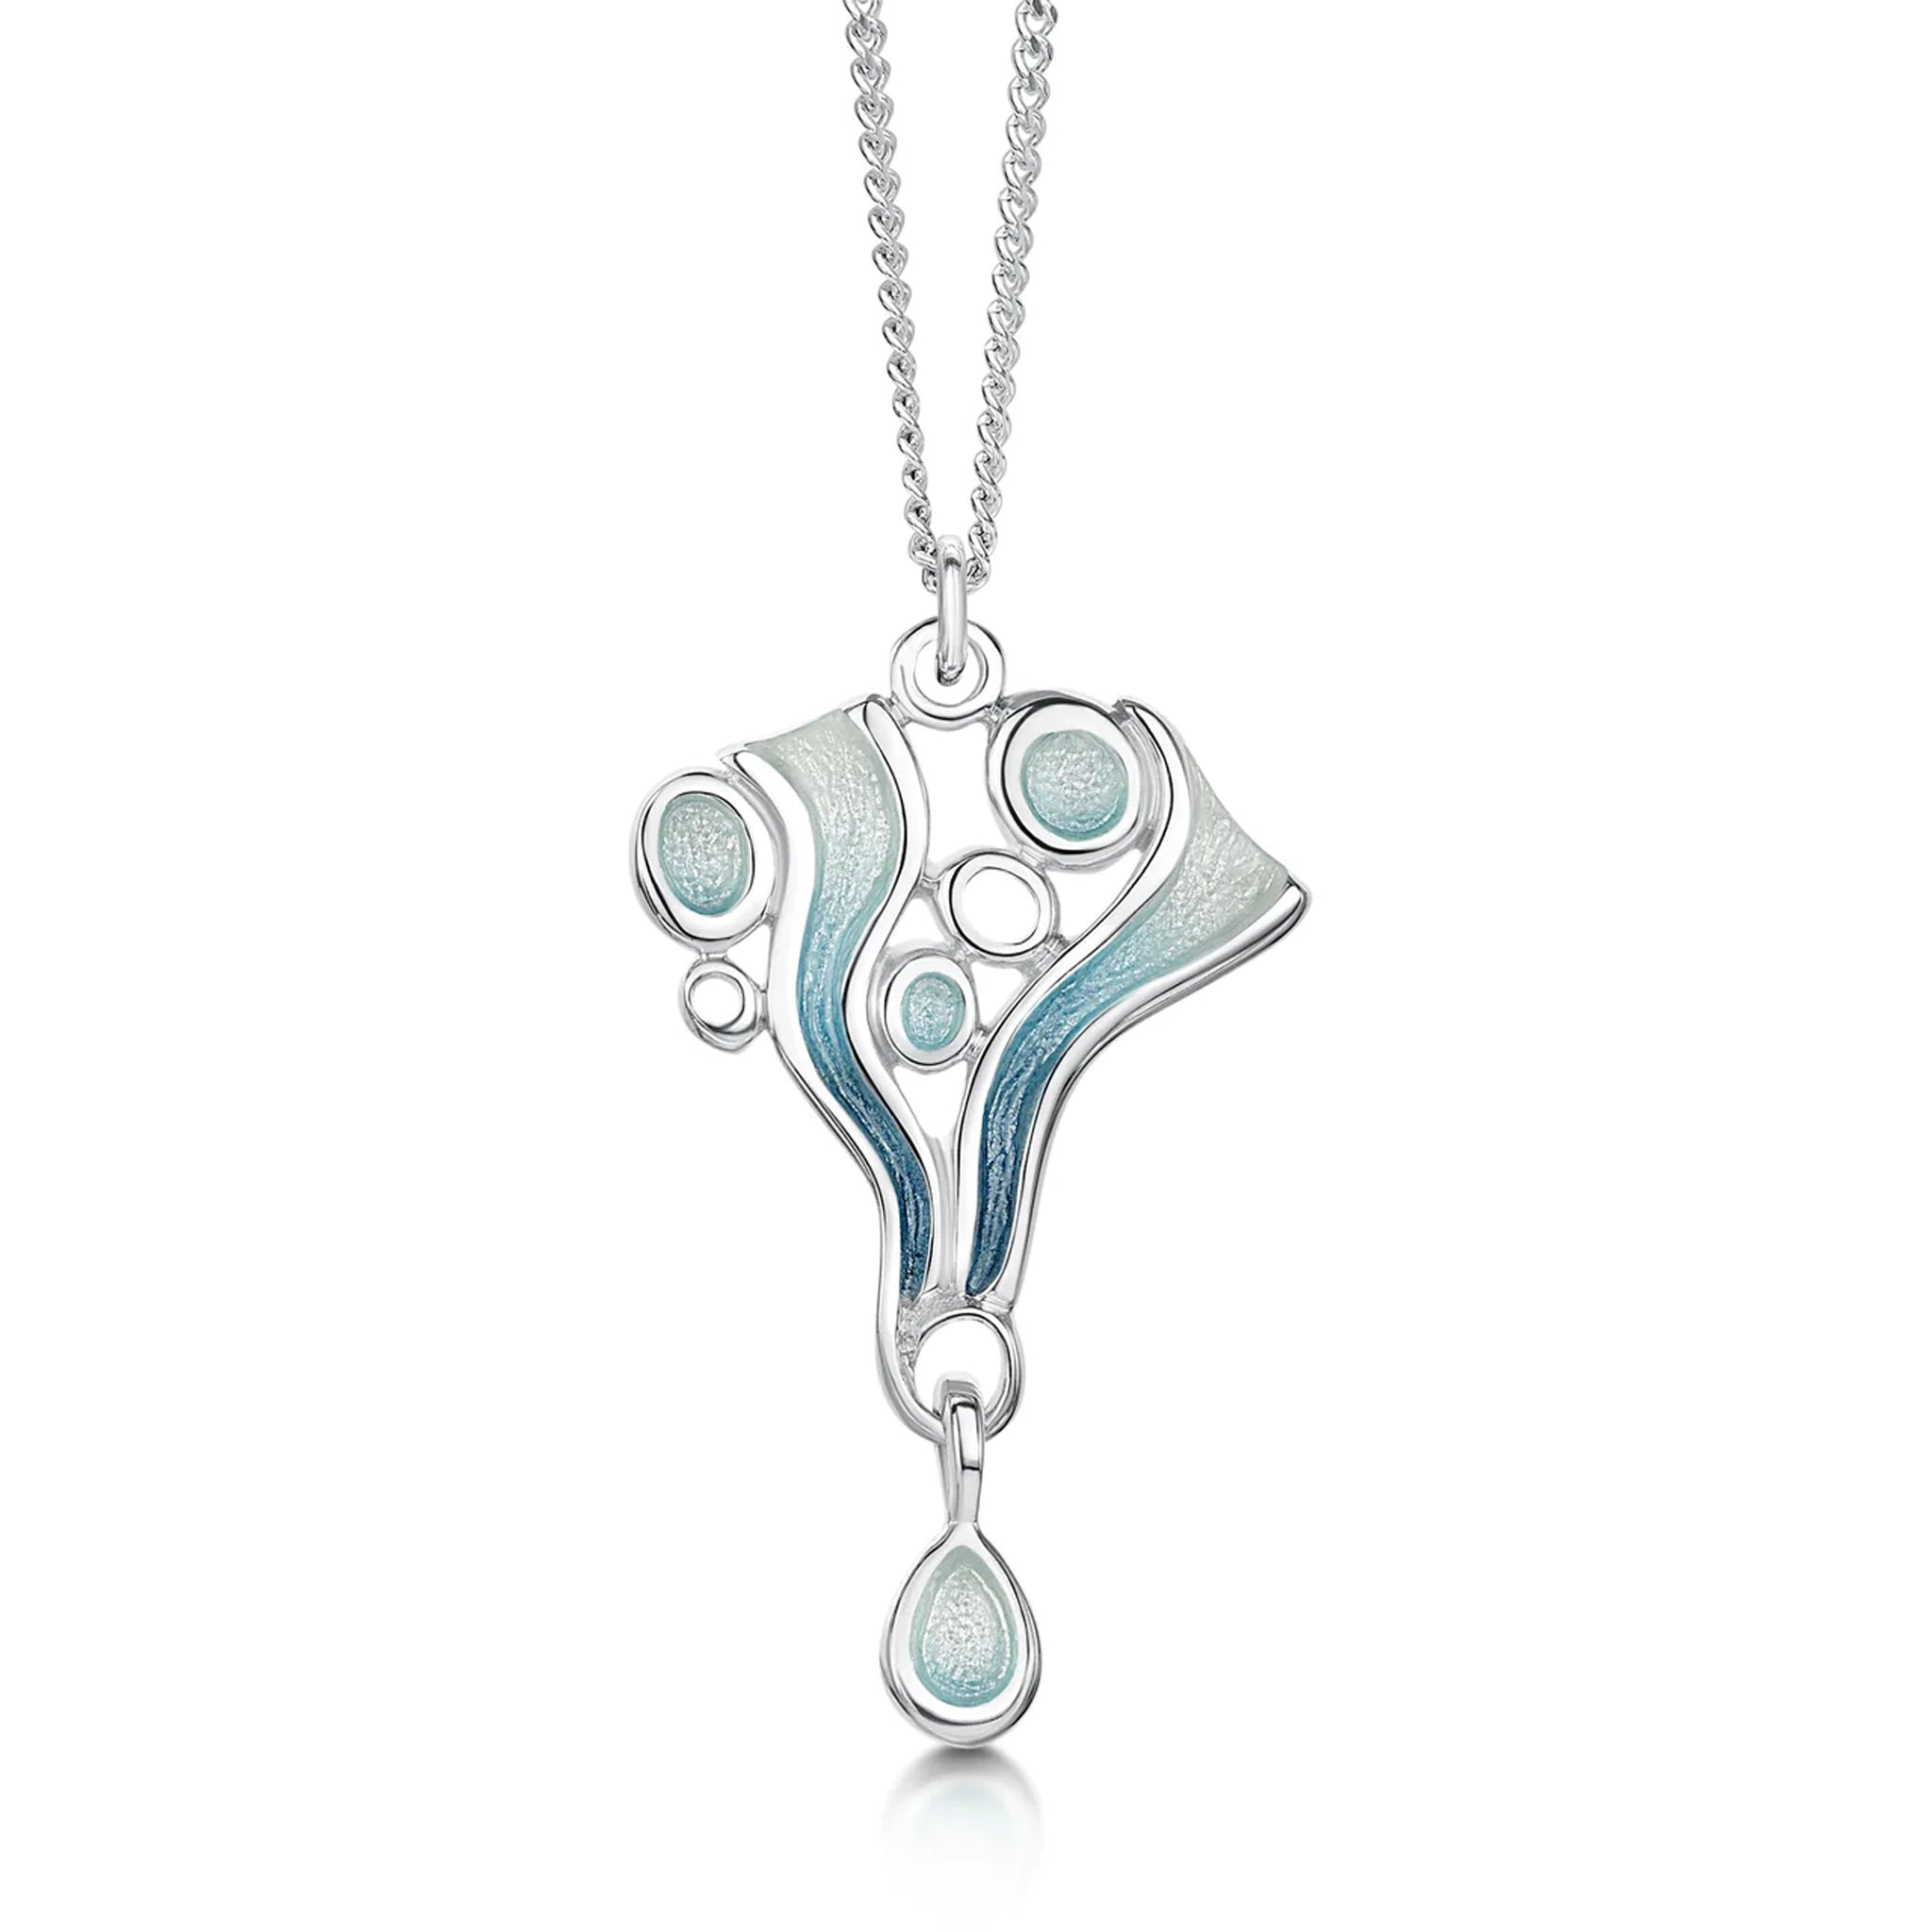 Silver pendant on chain with blue enamel shapes like water and round open silver circles to represent ice.